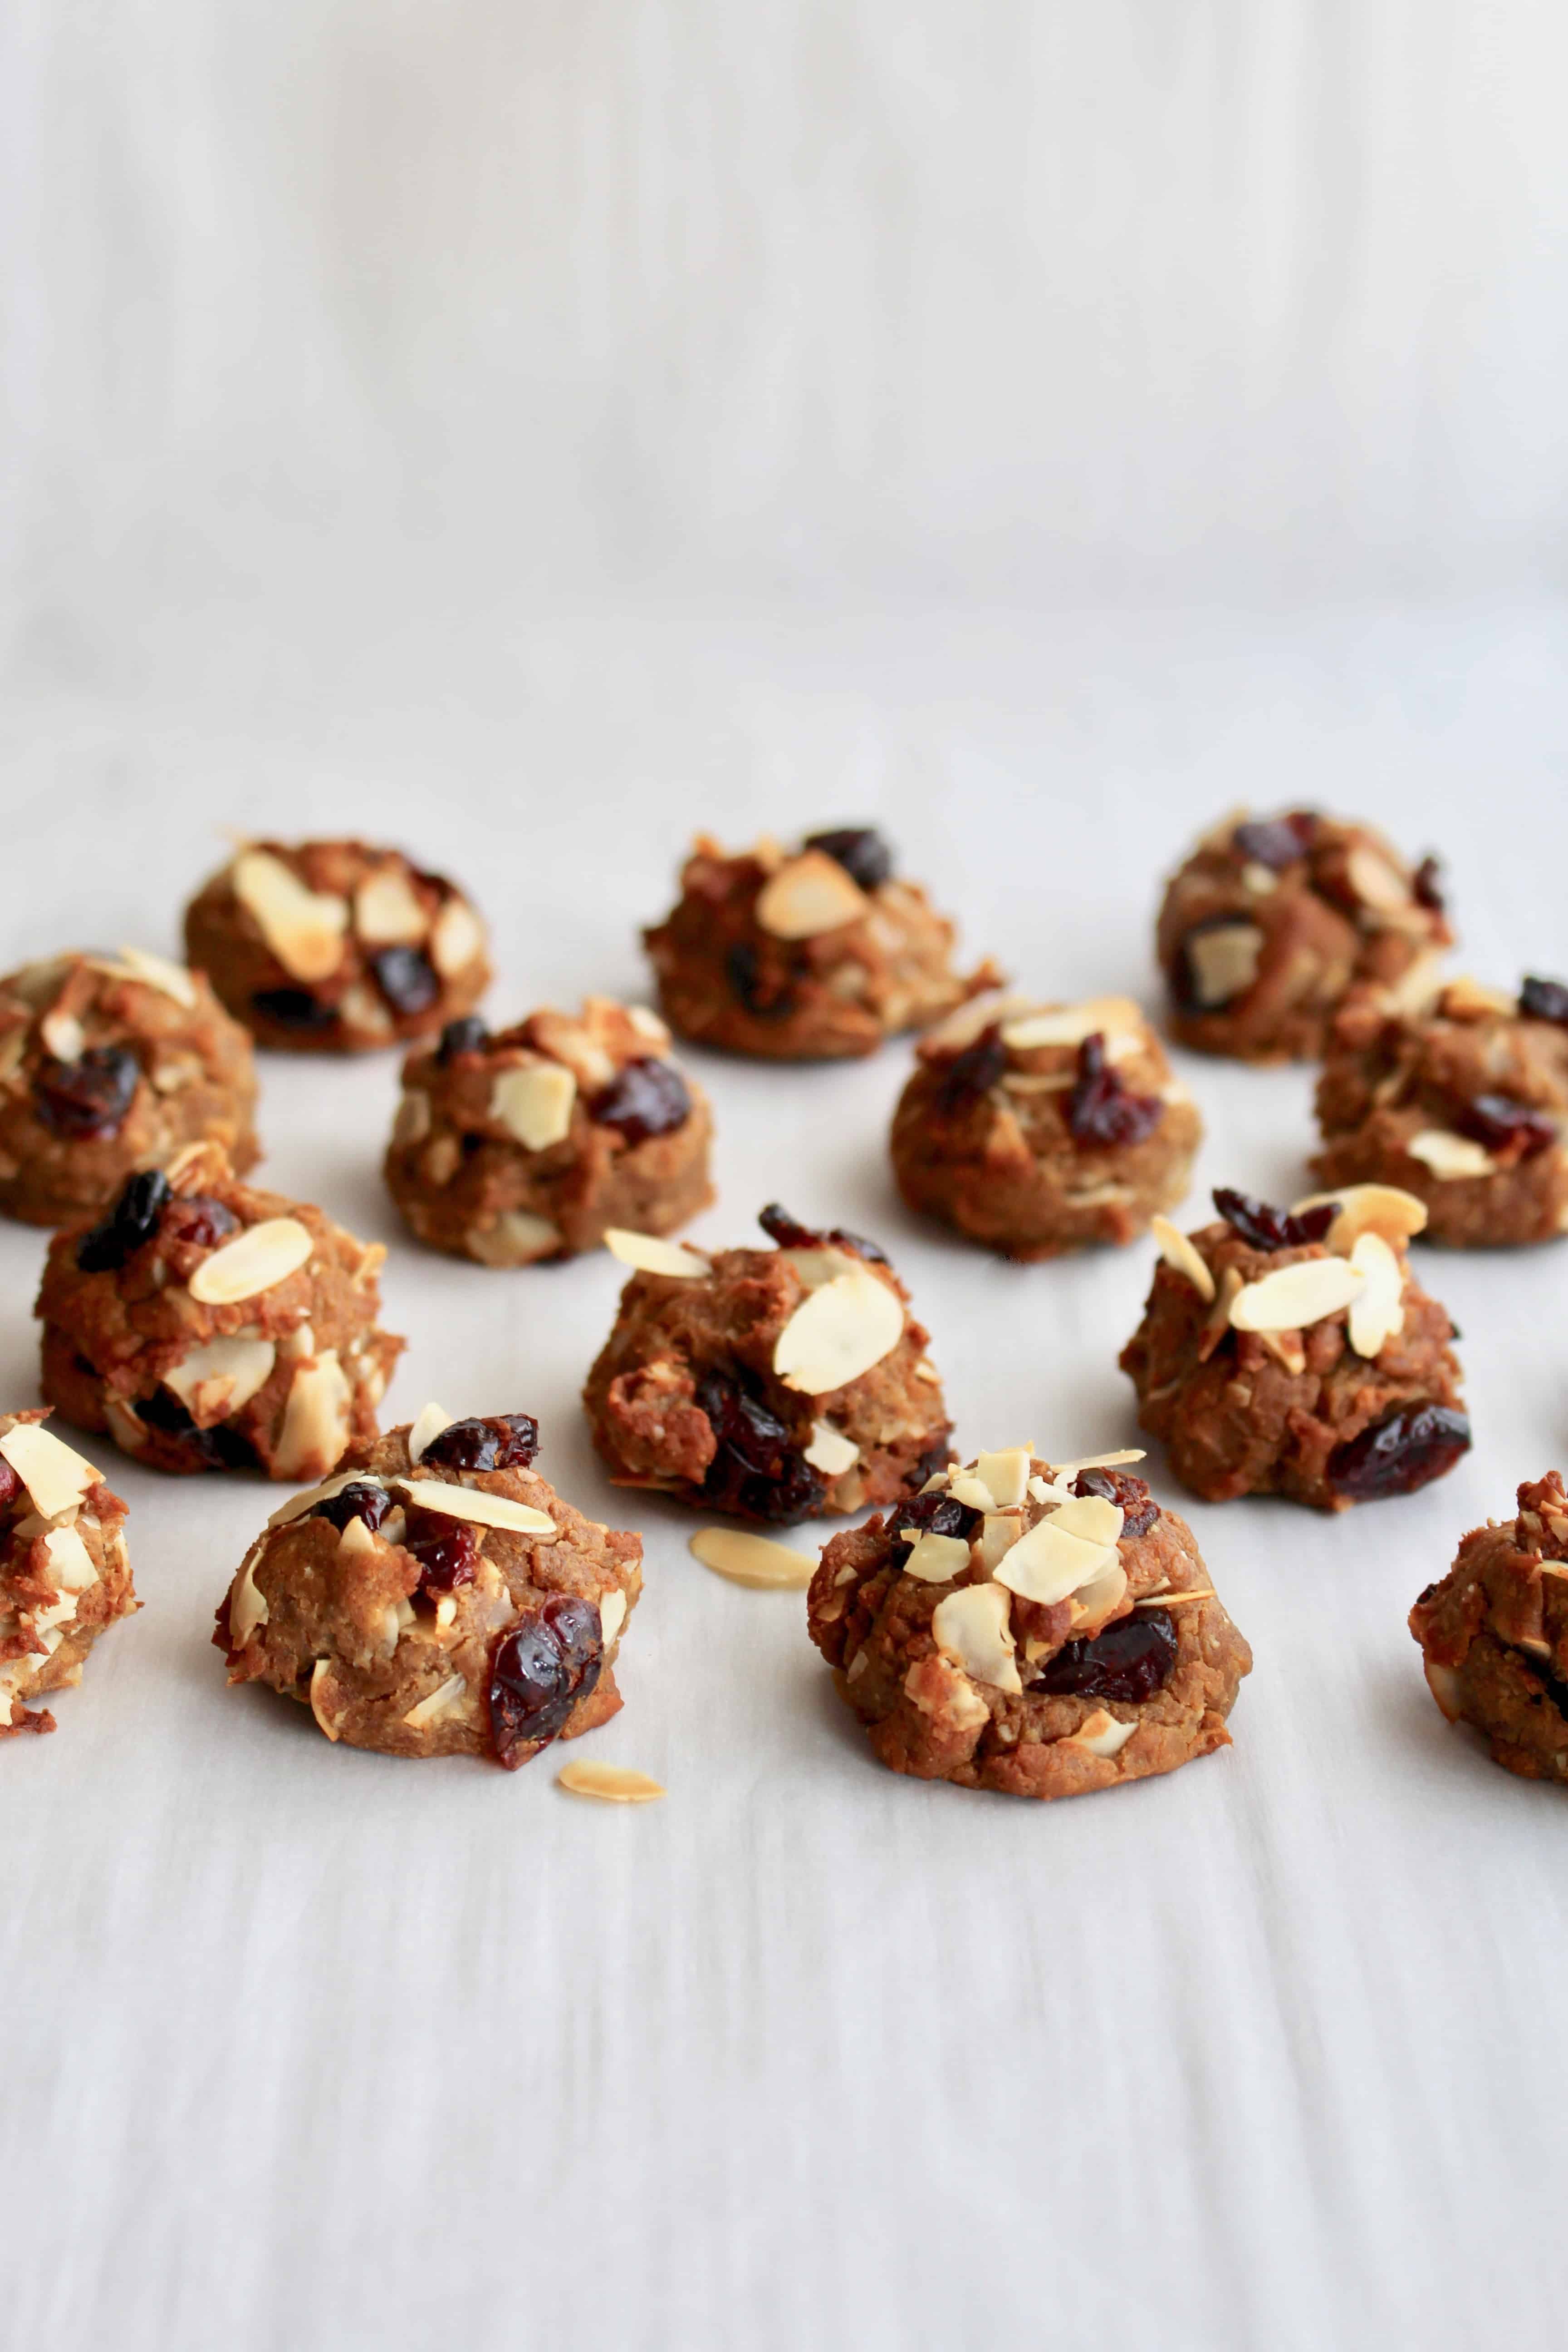 Lactation cookies with almonds and cranberries